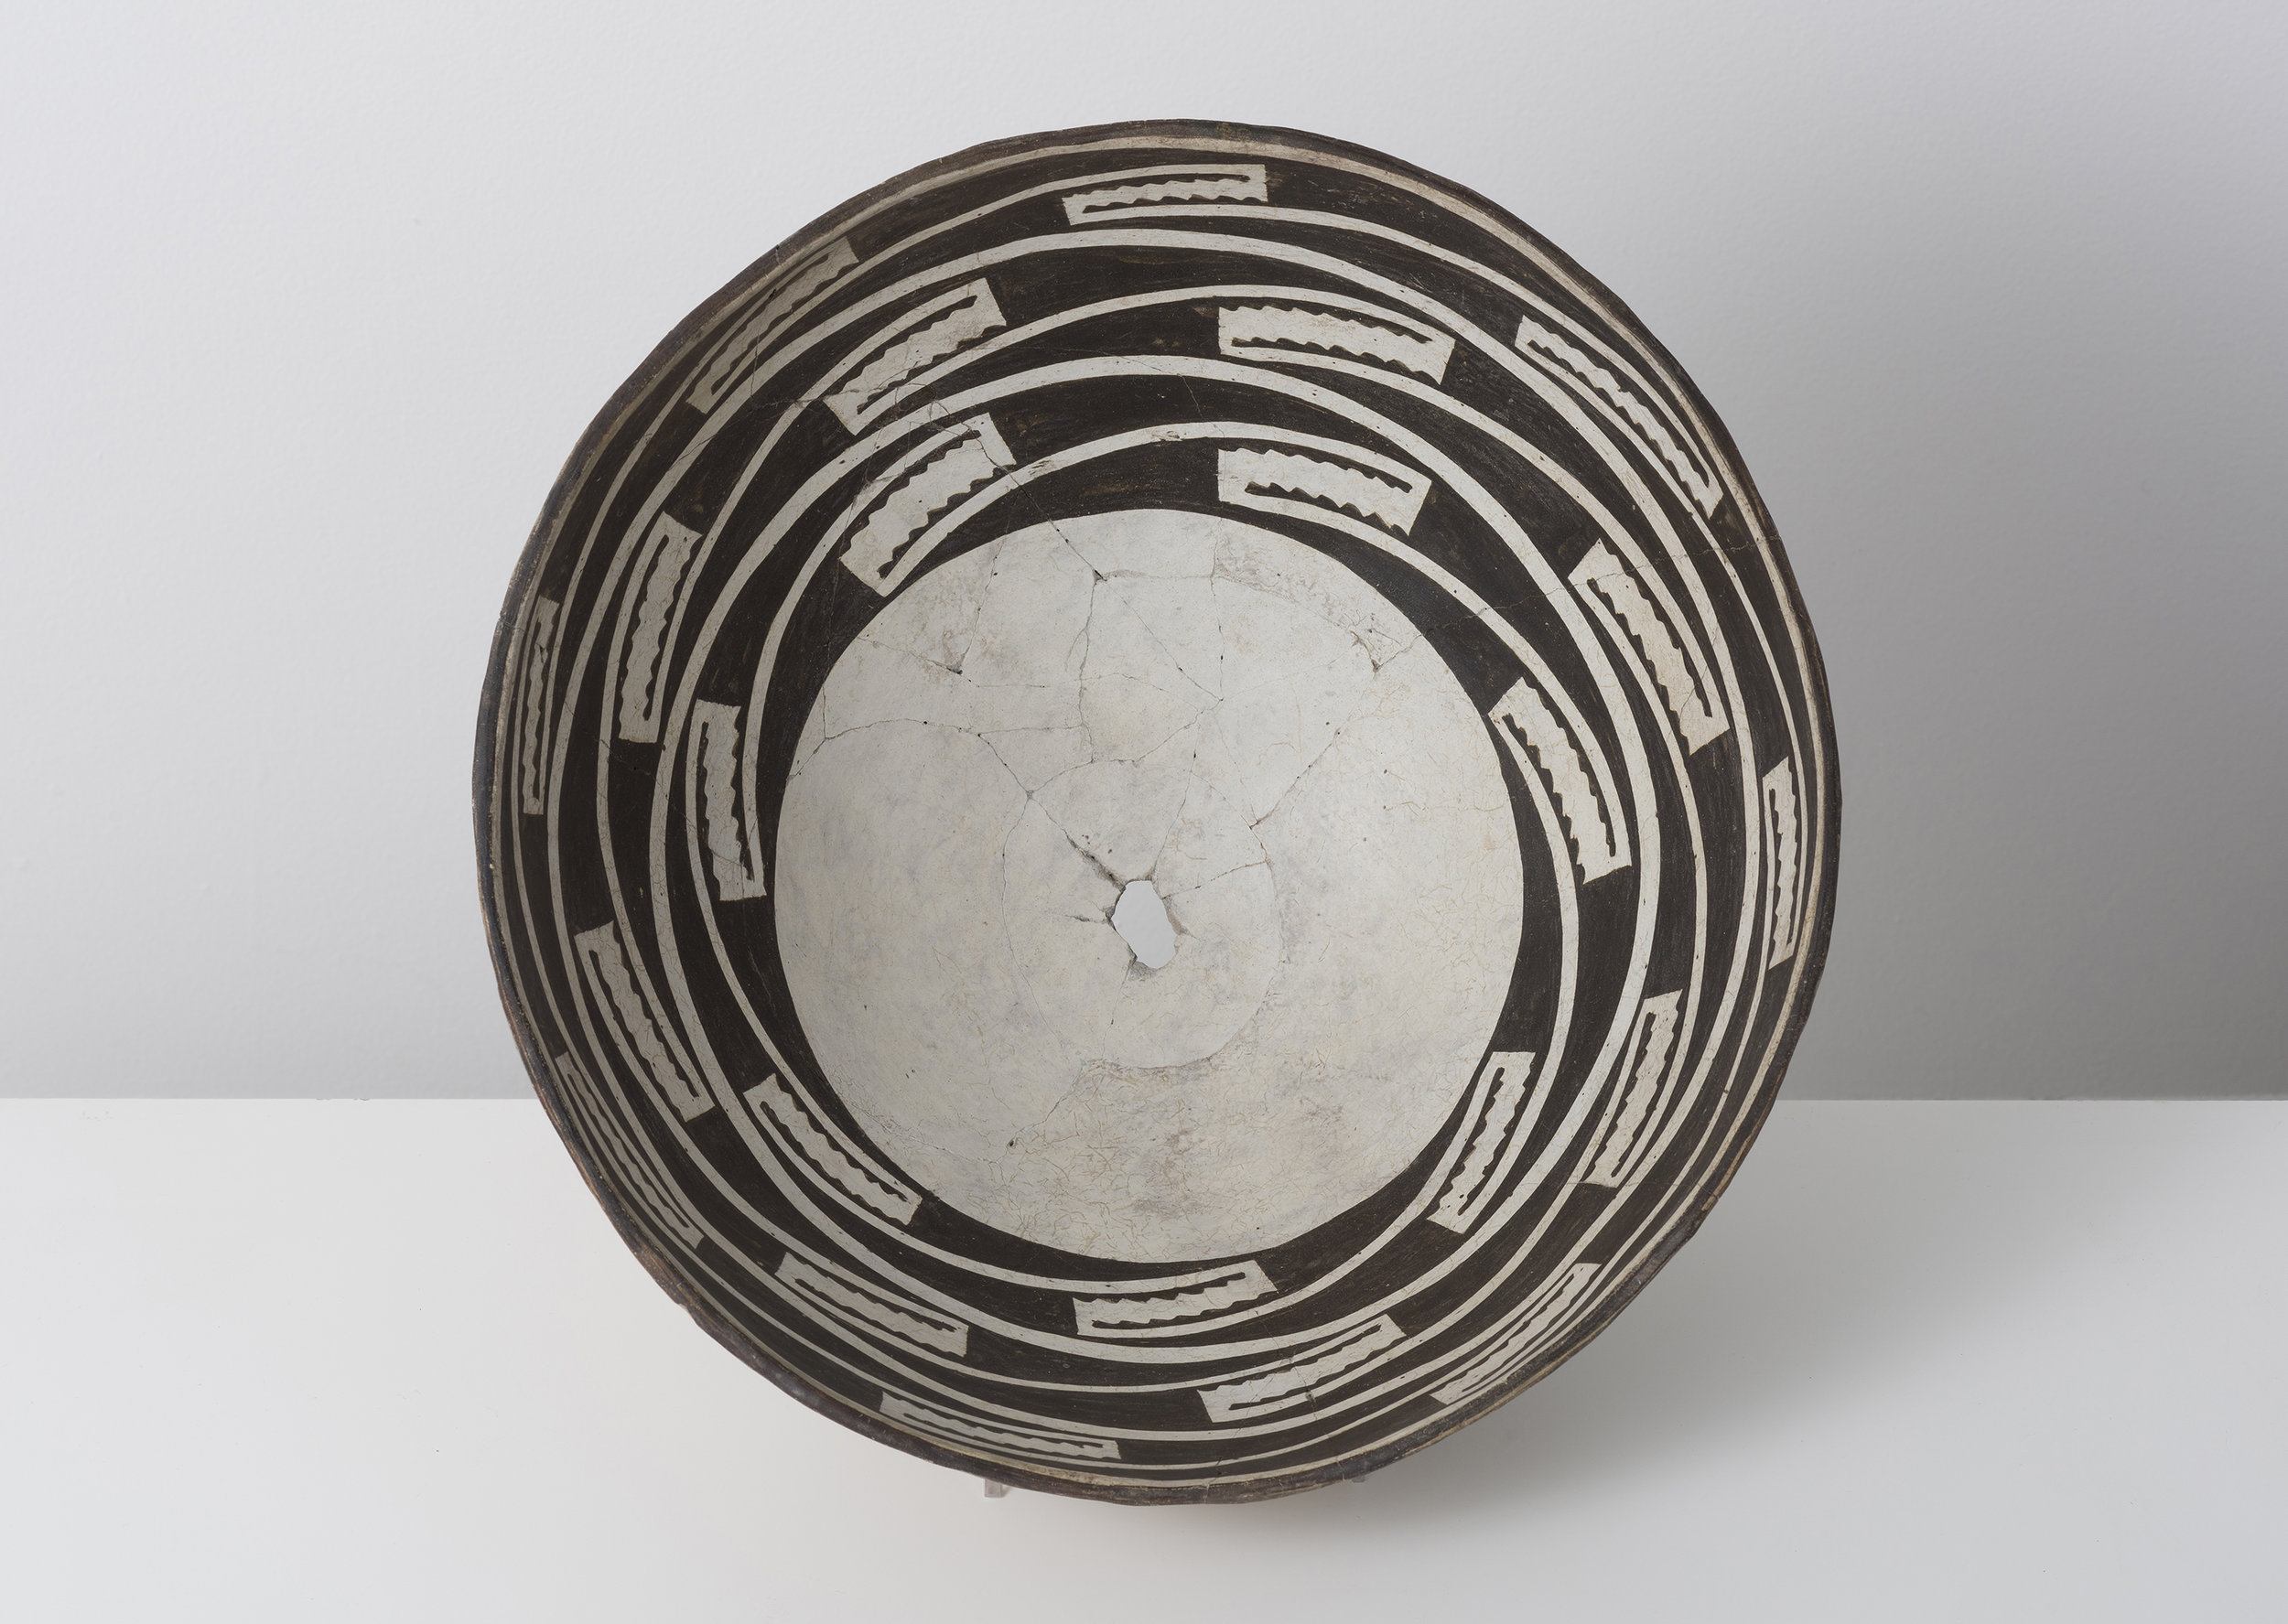   Classic Mimbres Black-on-white  Trance portal c. 900 - 1000 CE Painted ceramic 13 inches diameter, 4 inches depth    